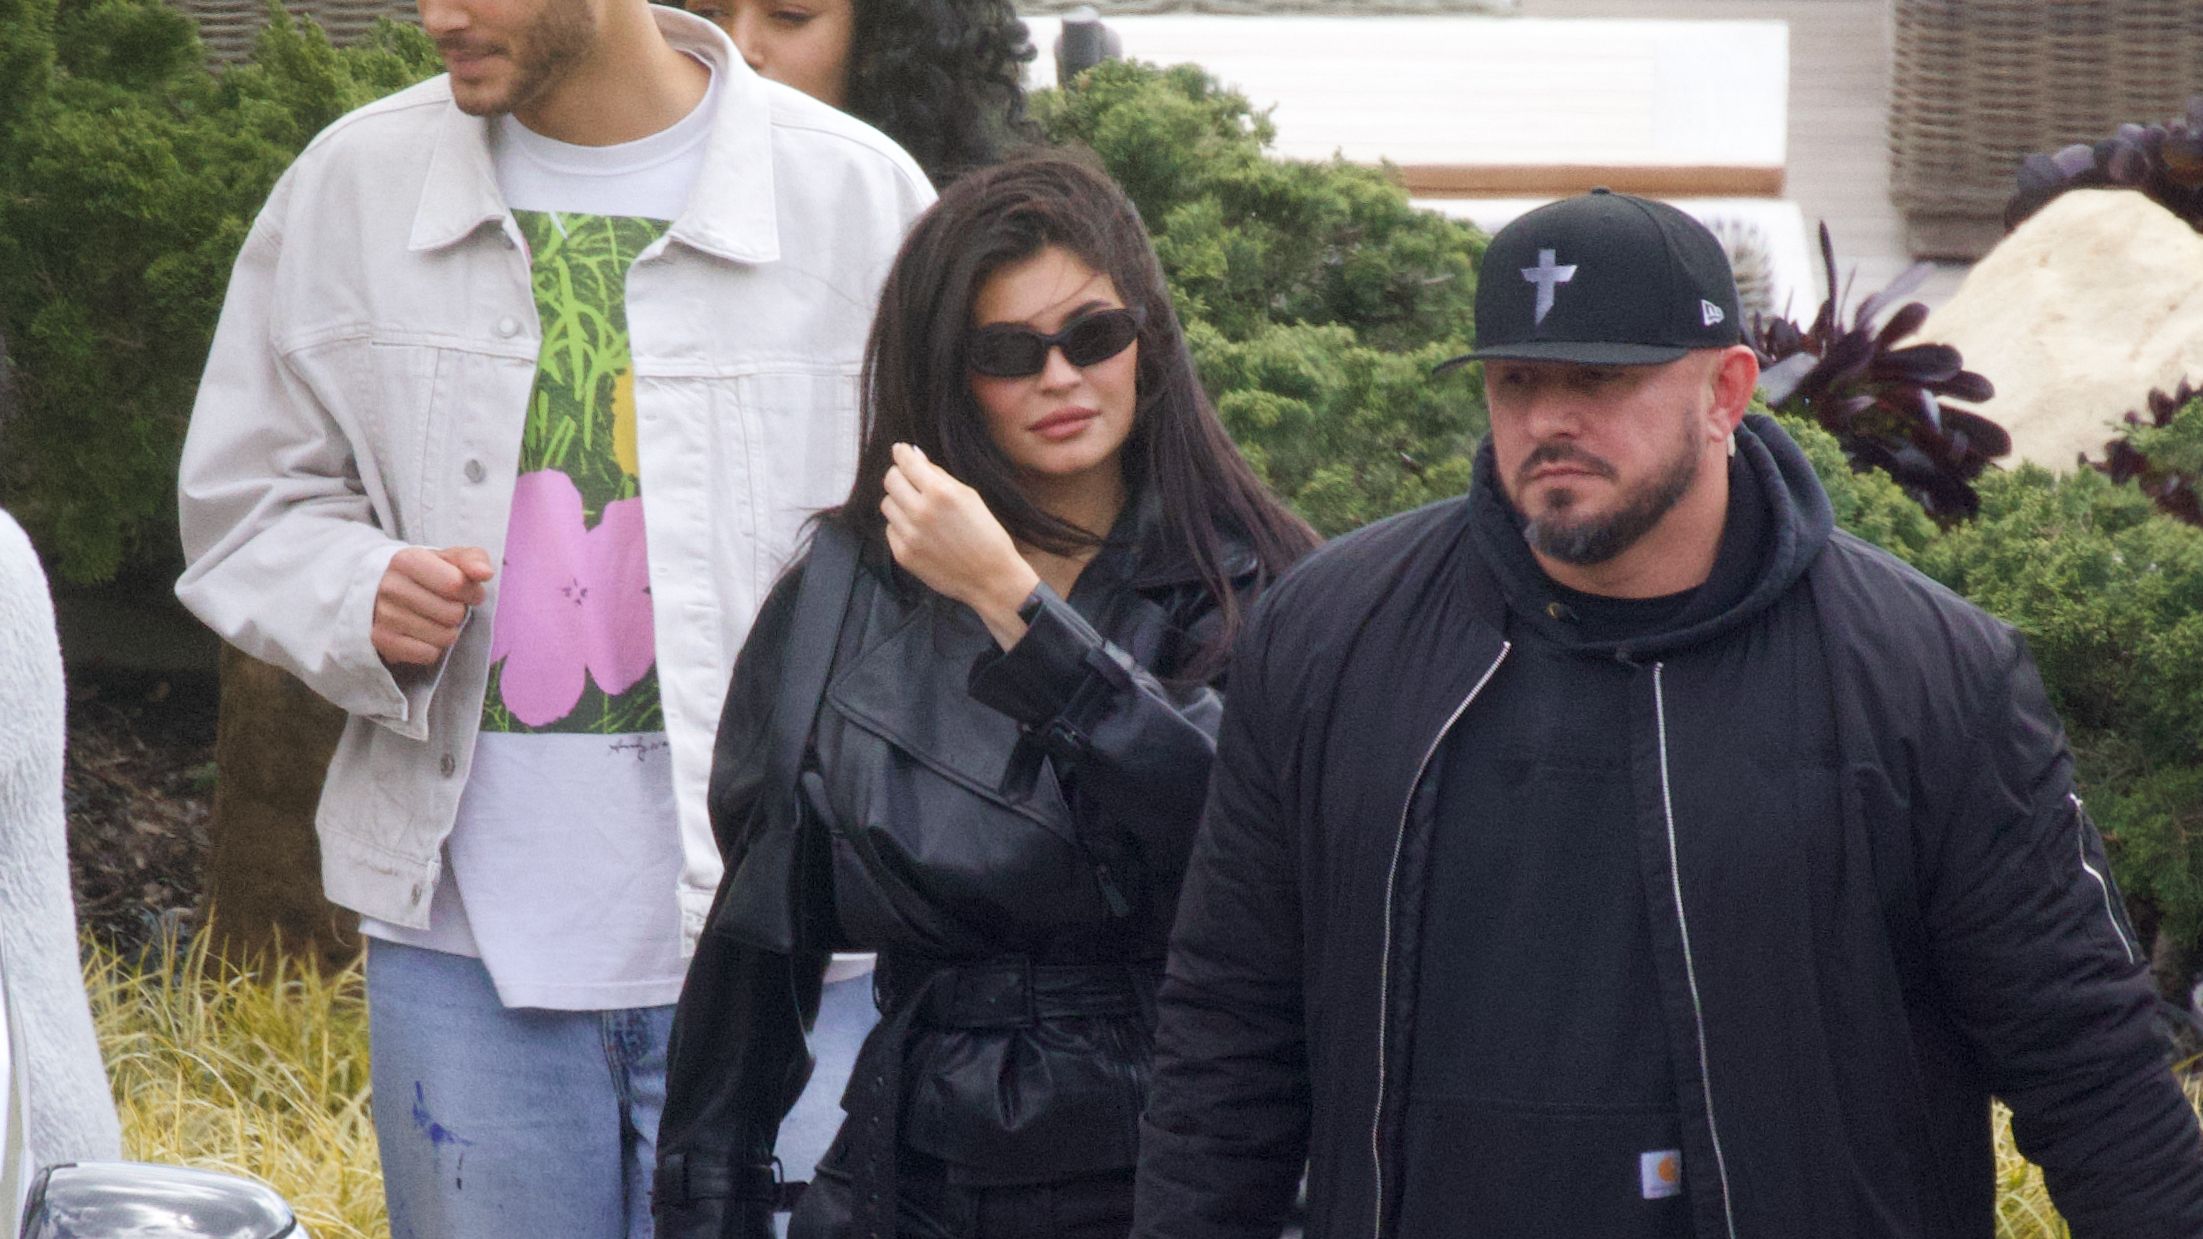 Kylie Jenner Puts a Feminine Spin on a Very 'Matrix'-esque Look